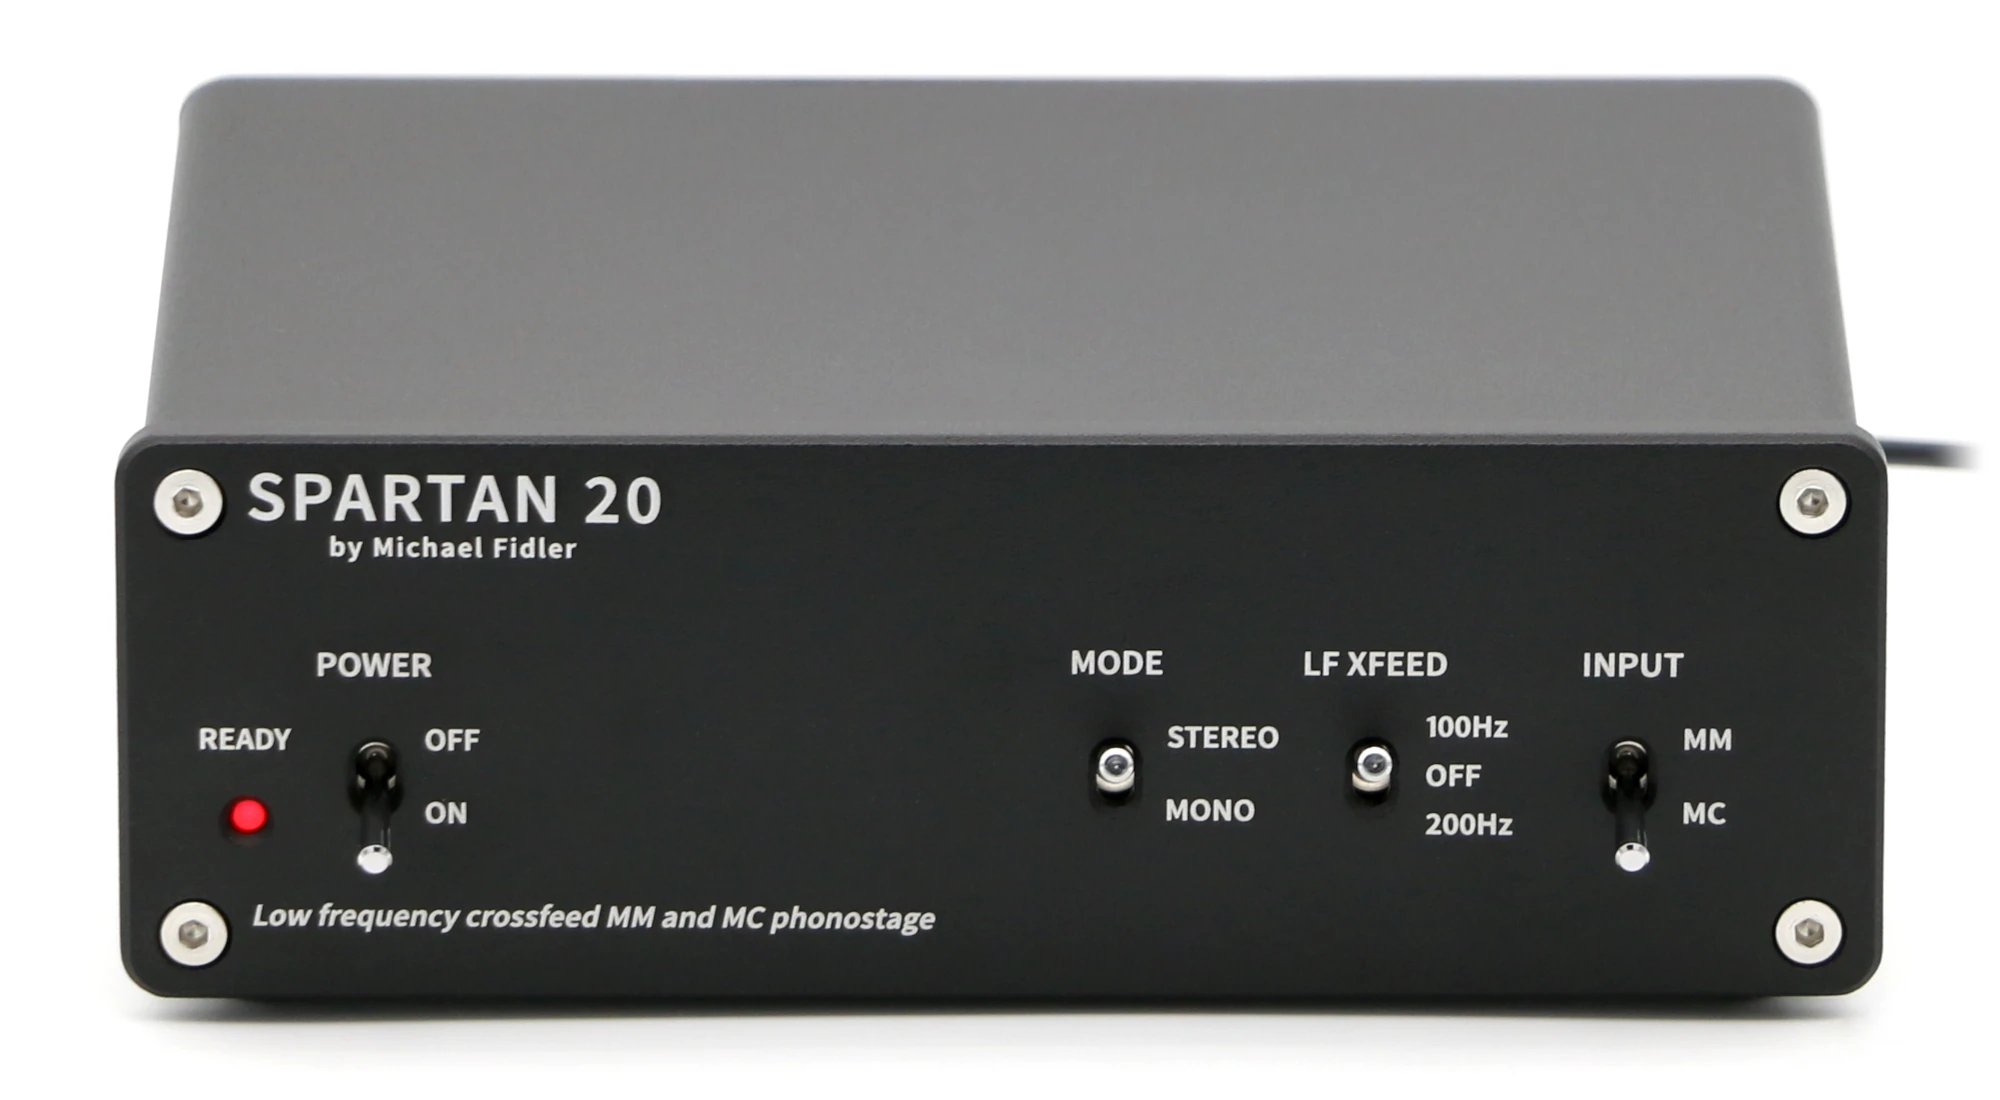 SPARTAN 20 phonostage front panel